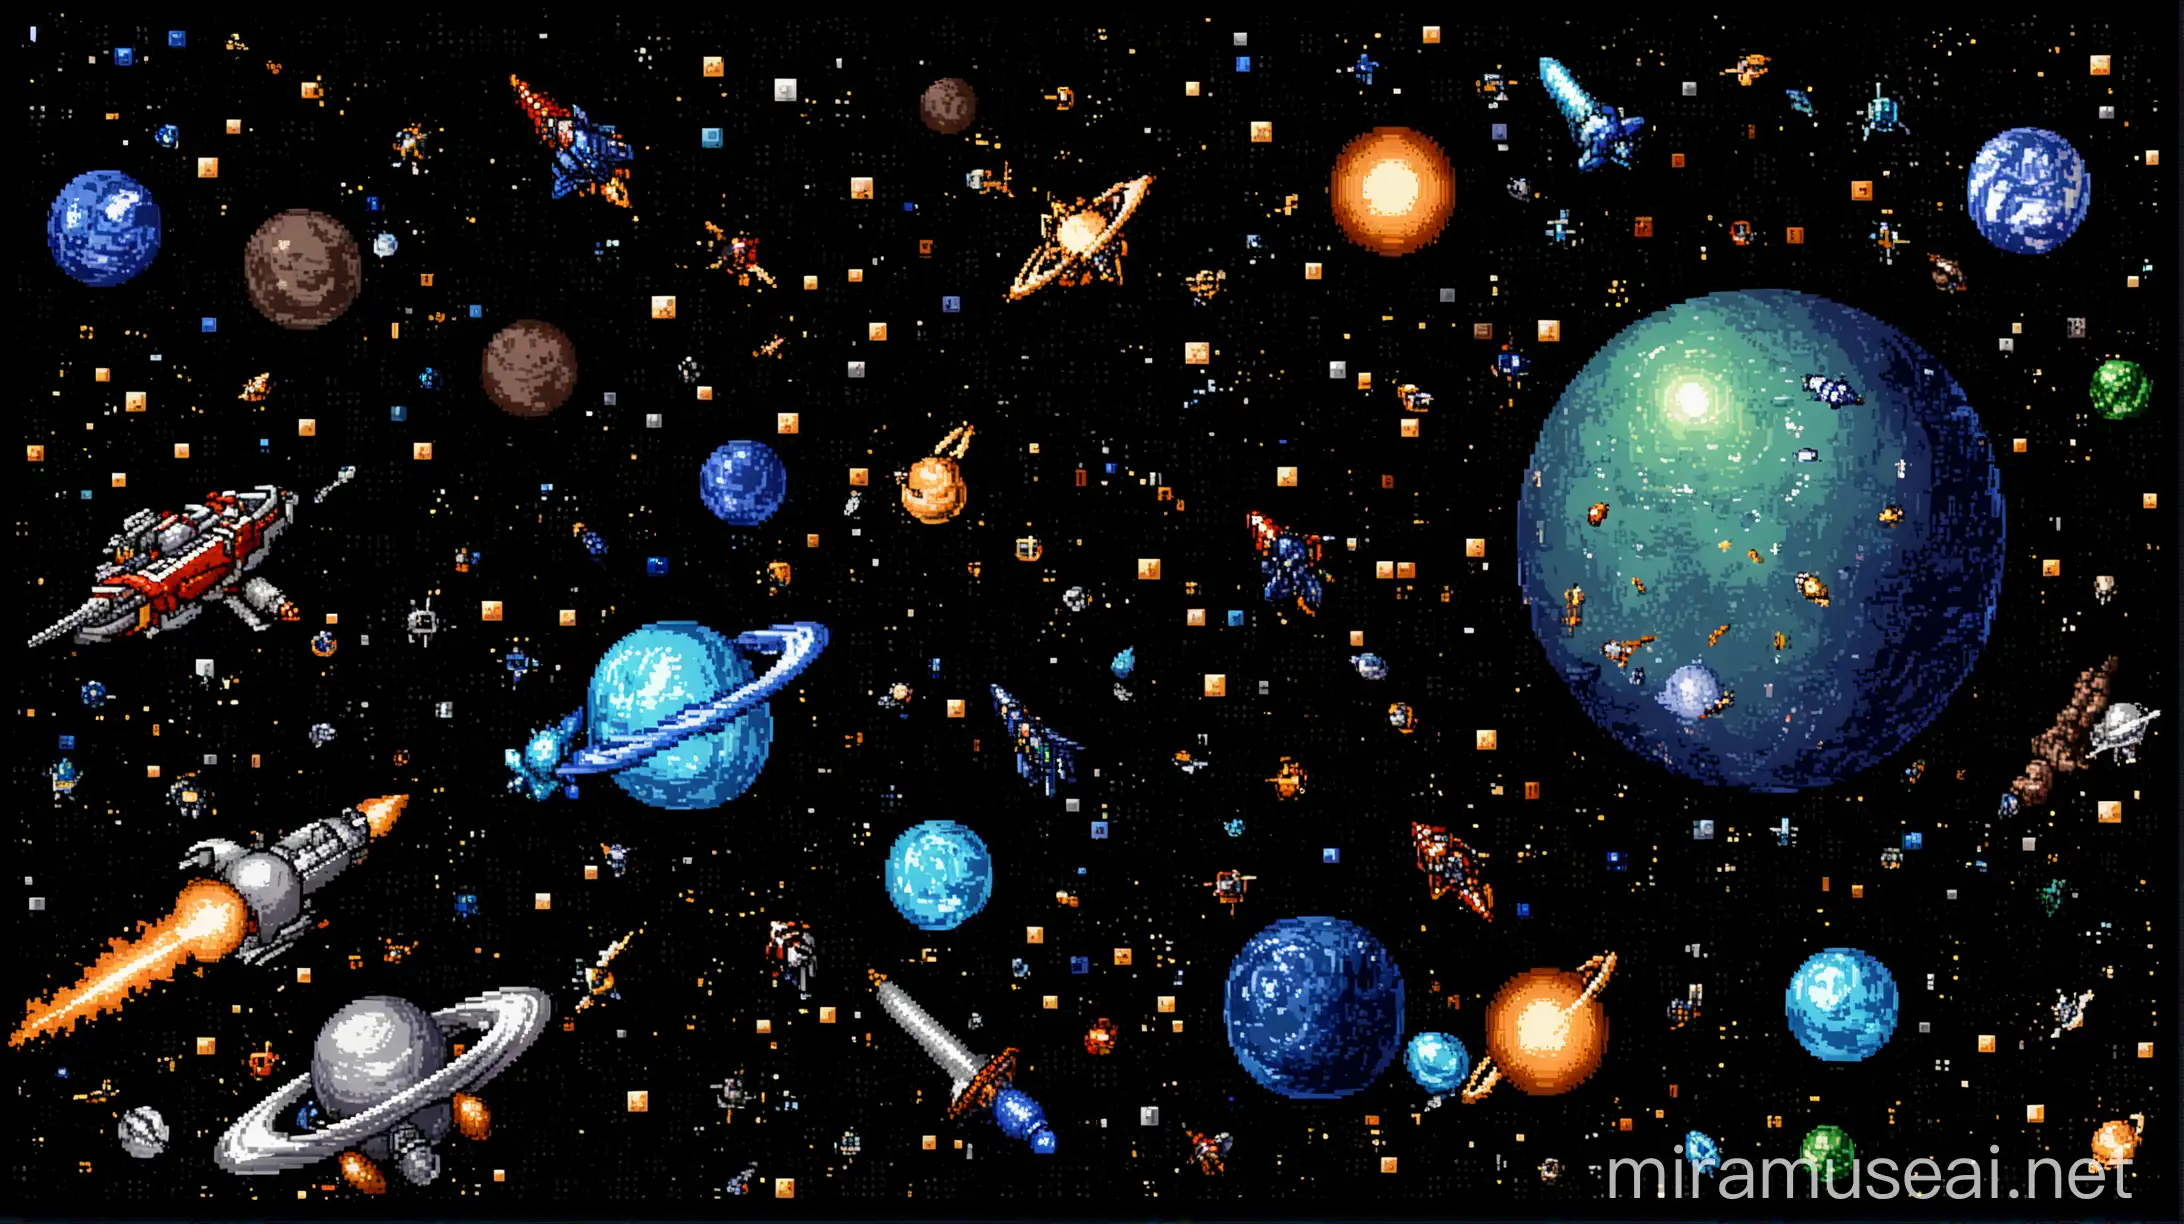 Space Galaxy Scene with Meteors and Spaceships